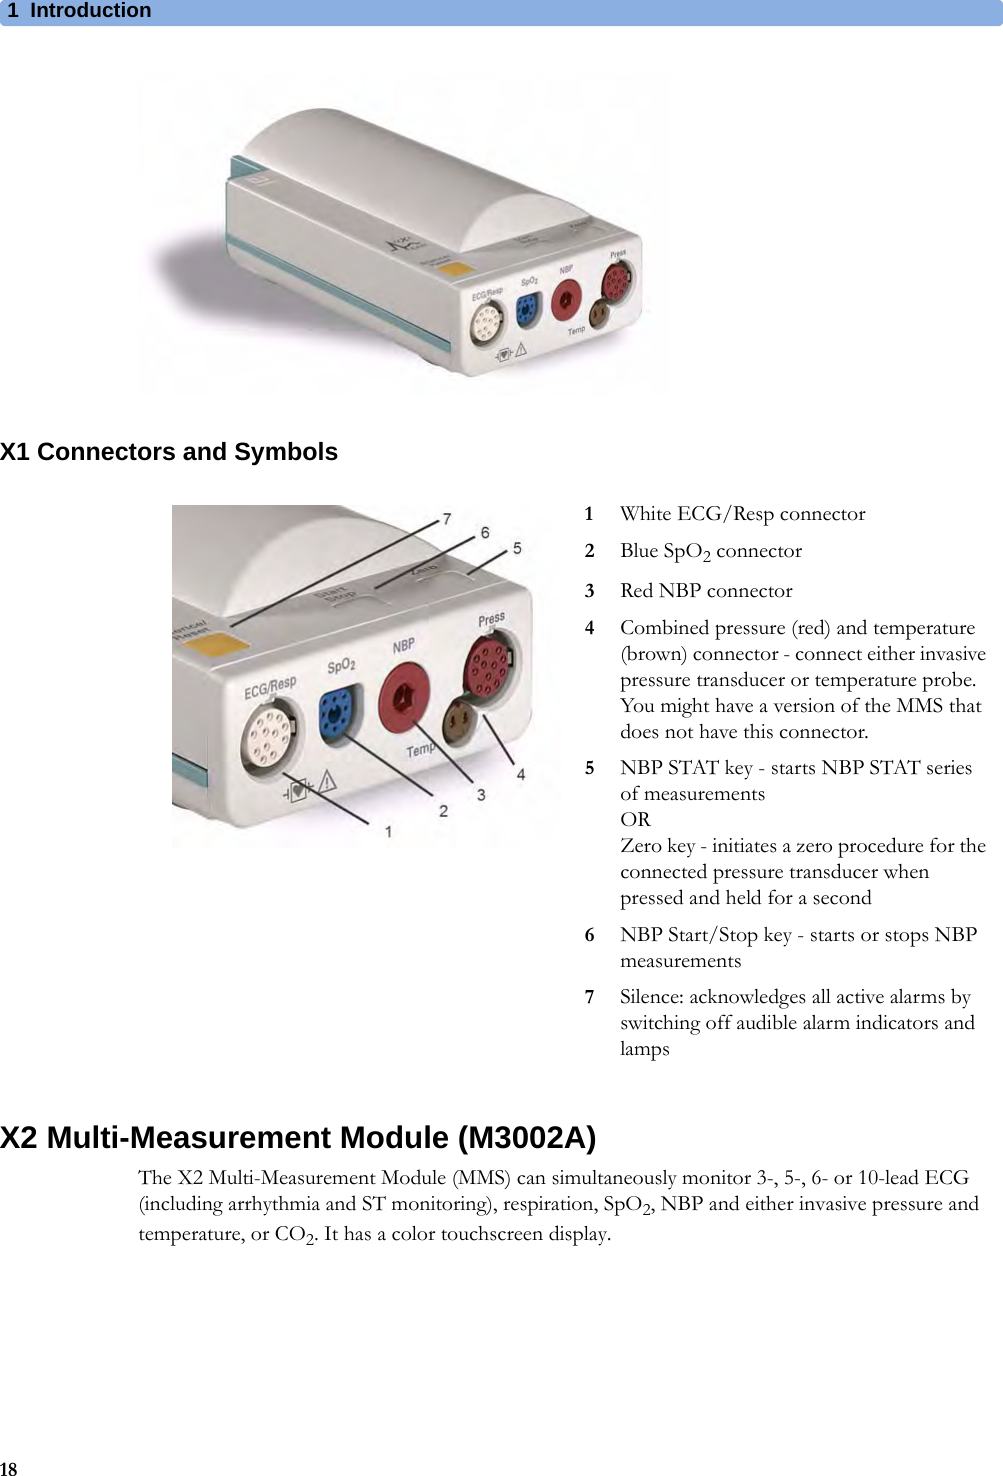 1Introduction18X1 Connectors and SymbolsX2 Multi-Measurement Module (M3002A)The X2 Multi-Measurement Module (MMS) can simultaneously monitor 3-, 5-, 6- or 10-lead ECG (including arrhythmia and ST monitoring), respiration, SpO2, NBP and either invasive pressure and temperature, or CO2. It has a color touchscreen display.1White ECG/Resp connector2Blue SpO2 connector3Red NBP connector4Combined pressure (red) and temperature (brown) connector - connect either invasive pressure transducer or temperature probe. You might have a version of the MMS that does not have this connector.5NBP STAT key - starts NBP STAT series of measurementsORZero key - initiates a zero procedure for the connected pressure transducer when pressed and held for a second6NBP Start/Stop key - starts or stops NBP measurements7Silence: acknowledges all active alarms by switching off audible alarm indicators and lamps